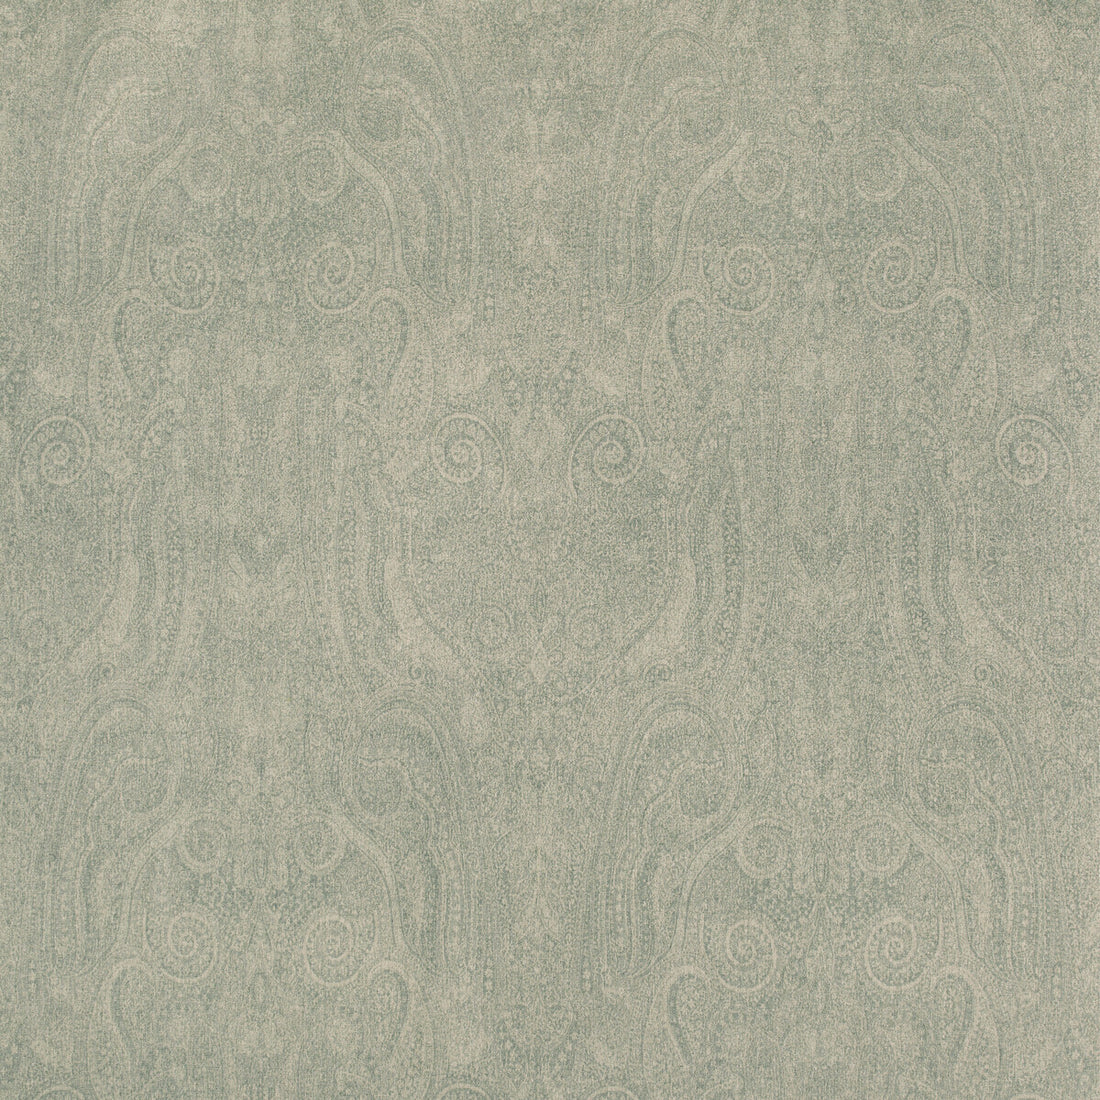 Foxhill Paisley fabric in aqua color - pattern 2019112.113.0 - by Lee Jofa in the Manor House collection